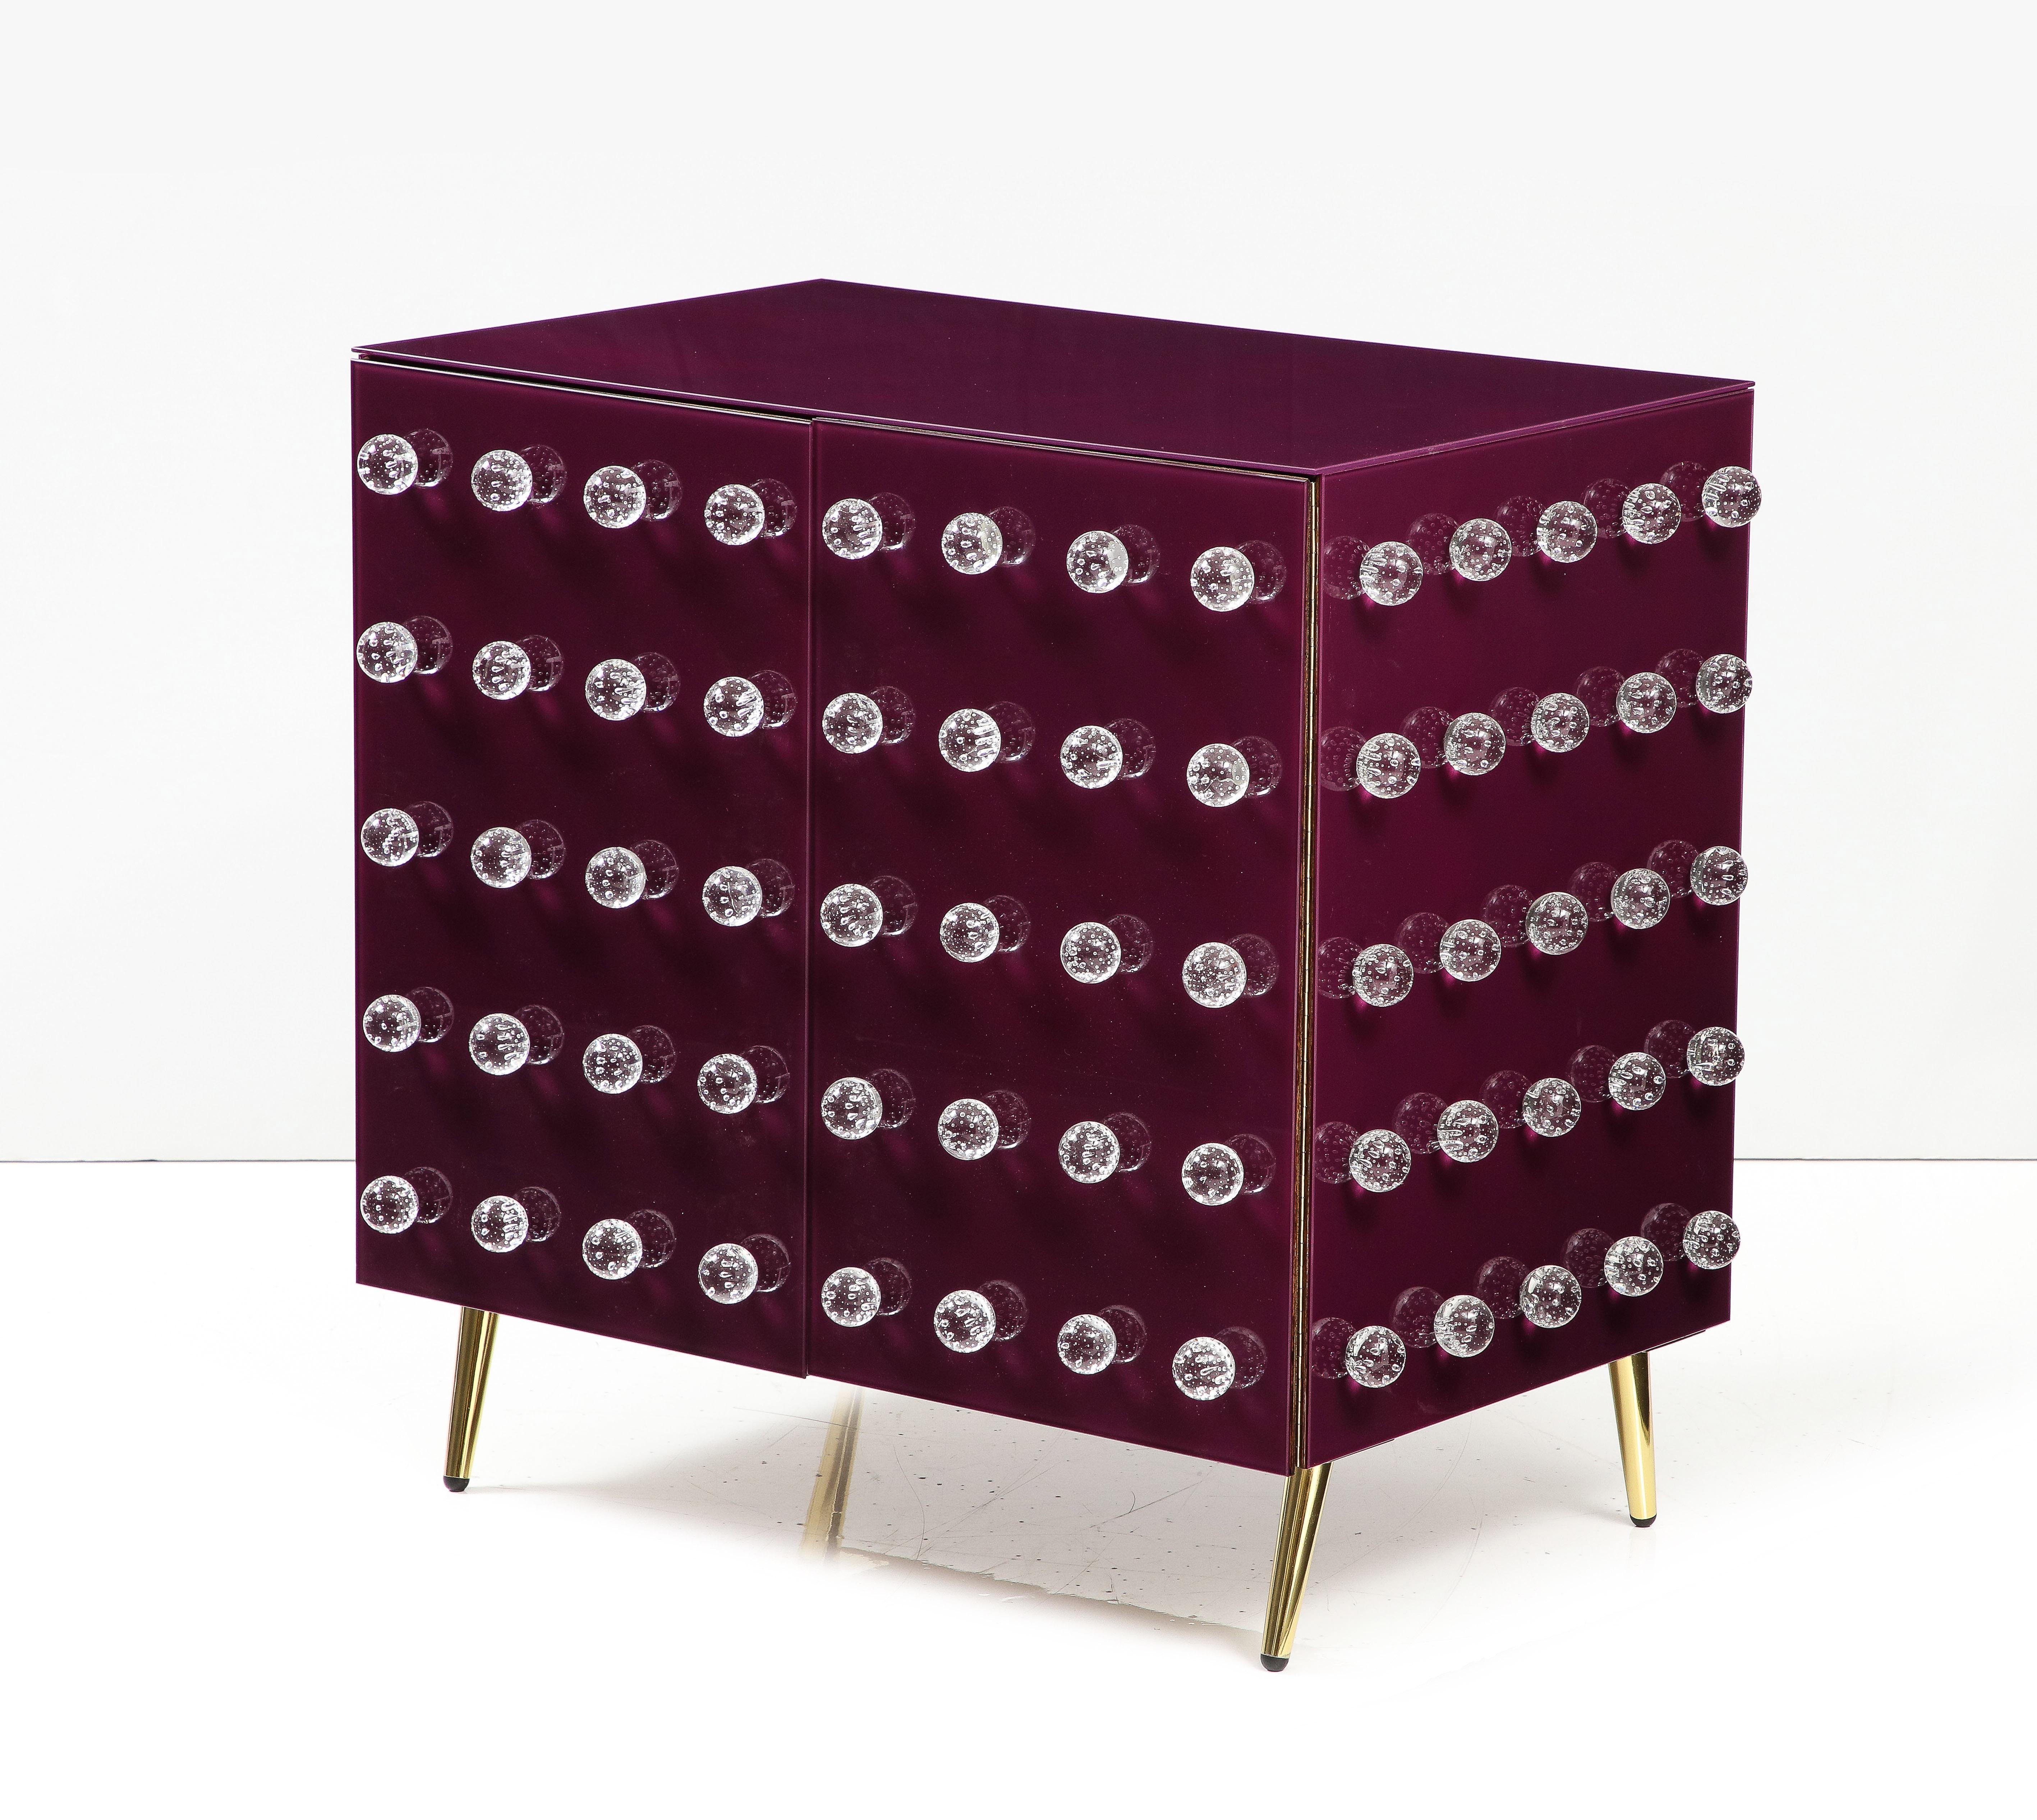 Murano glass kitchen cabinet, jewelry-inspired design. Handcrafted birch wood frame with fine Murano glass and brass feet. 

Ninety vibrant Murano glass spheres and ground purple glass inlays are meticulously embedded into the exterior, a stunning